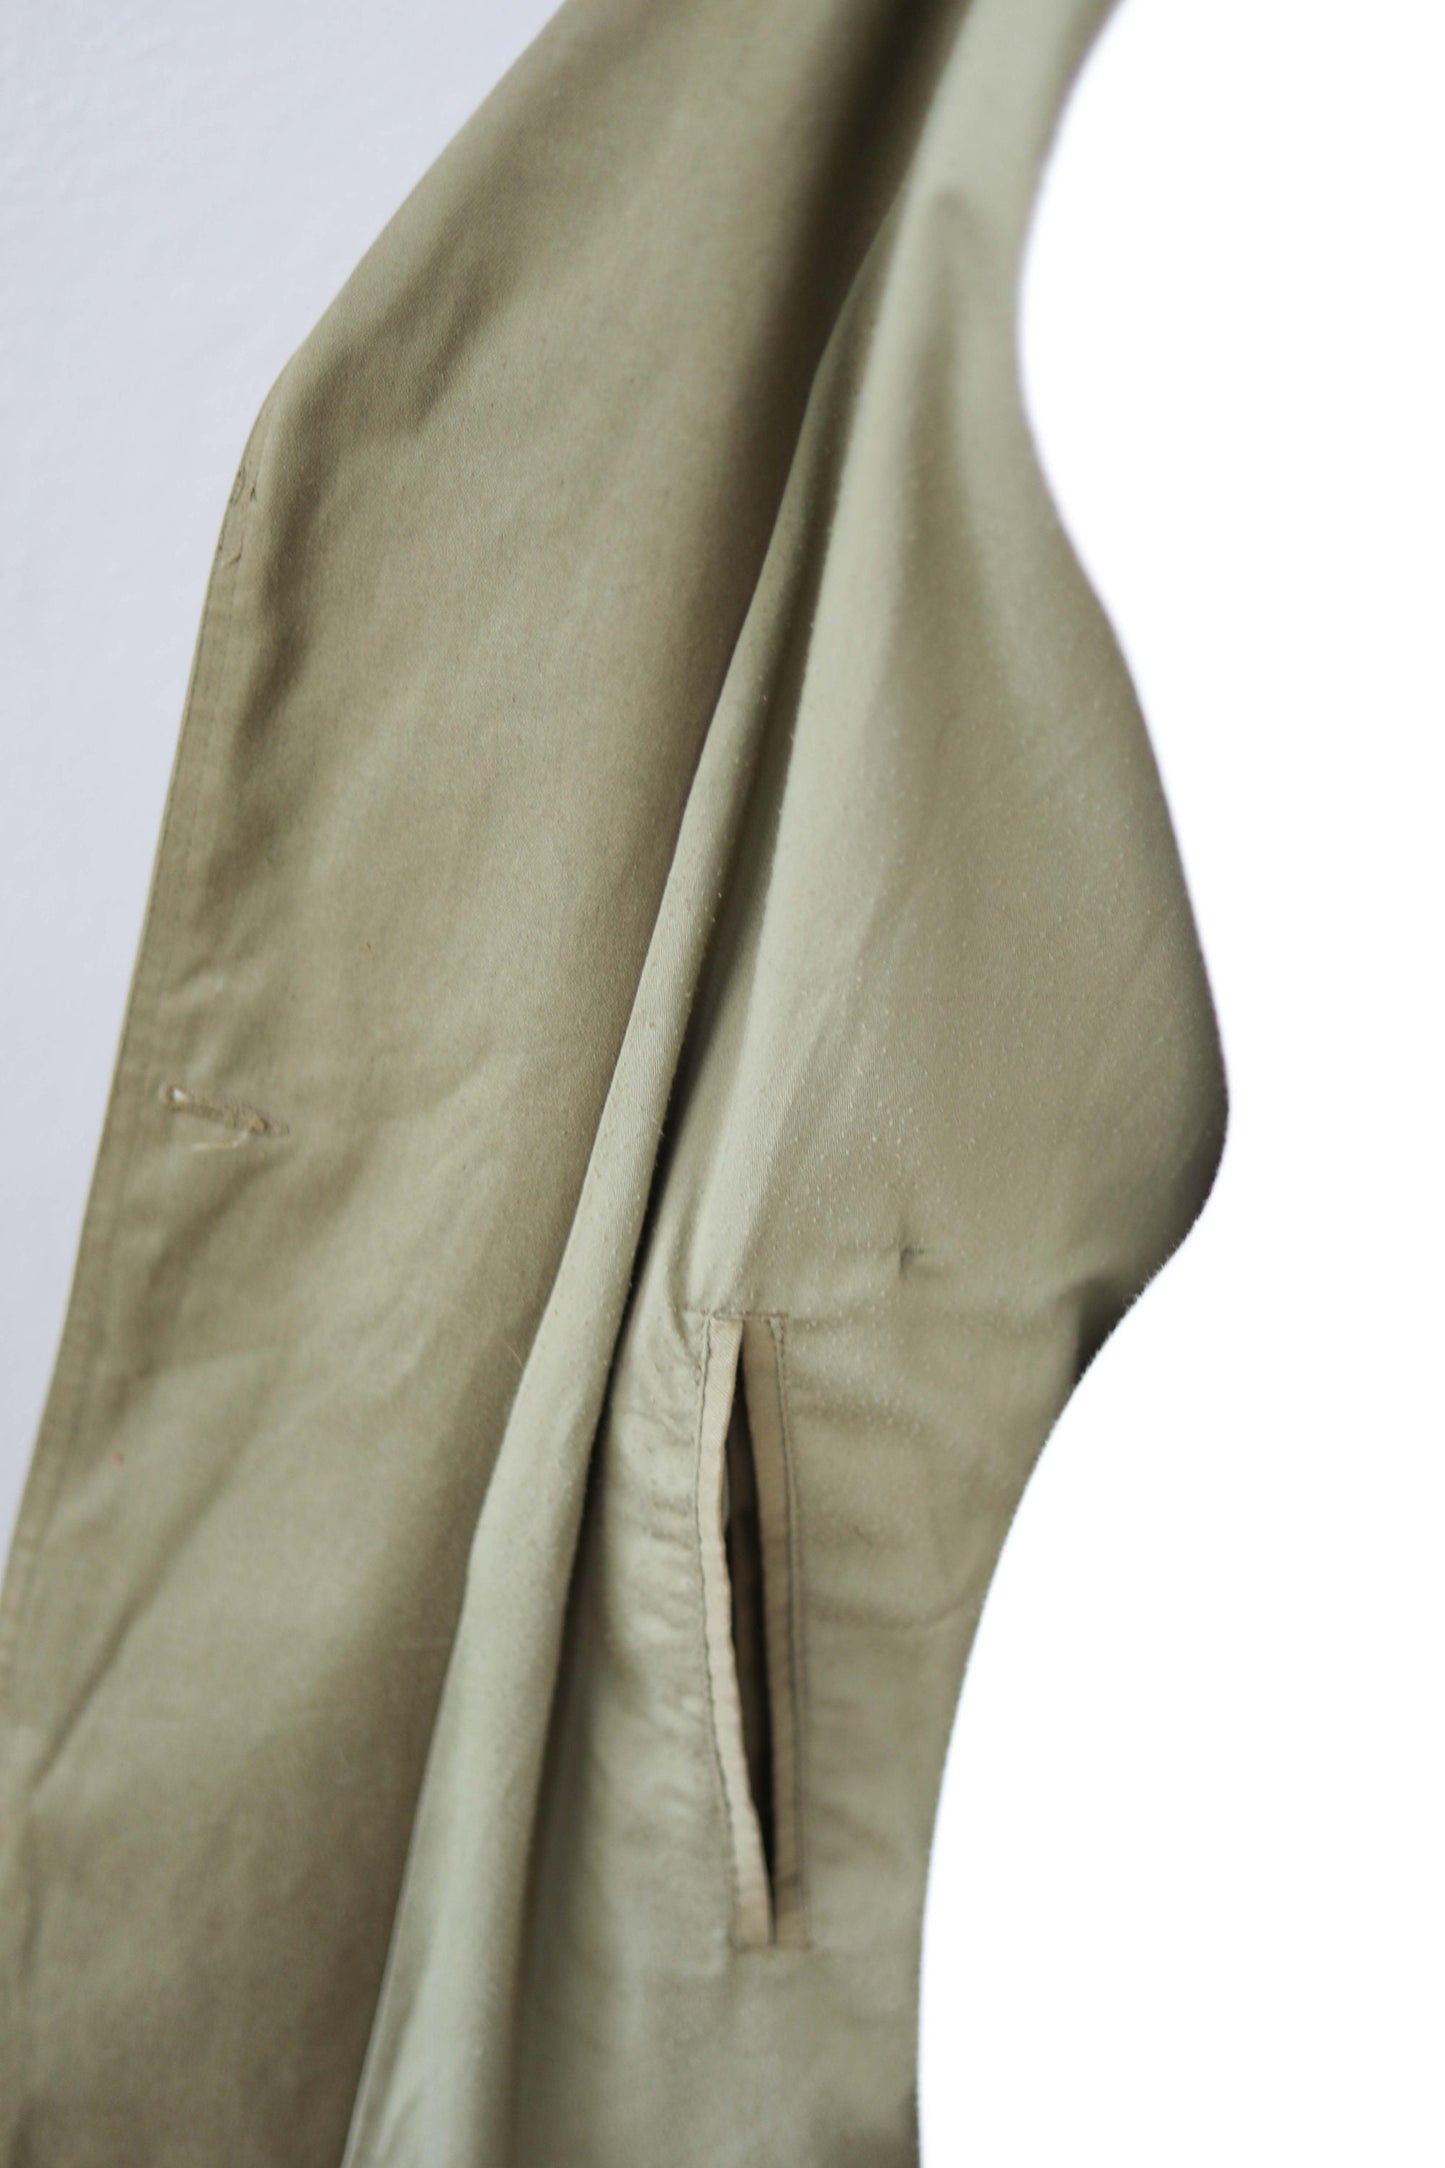 Vintage 1970s Olive Green Cotton Twill Military Spanish Land Army Trench w Lining + Half Belt - Sizes S to XL Choose Your Size